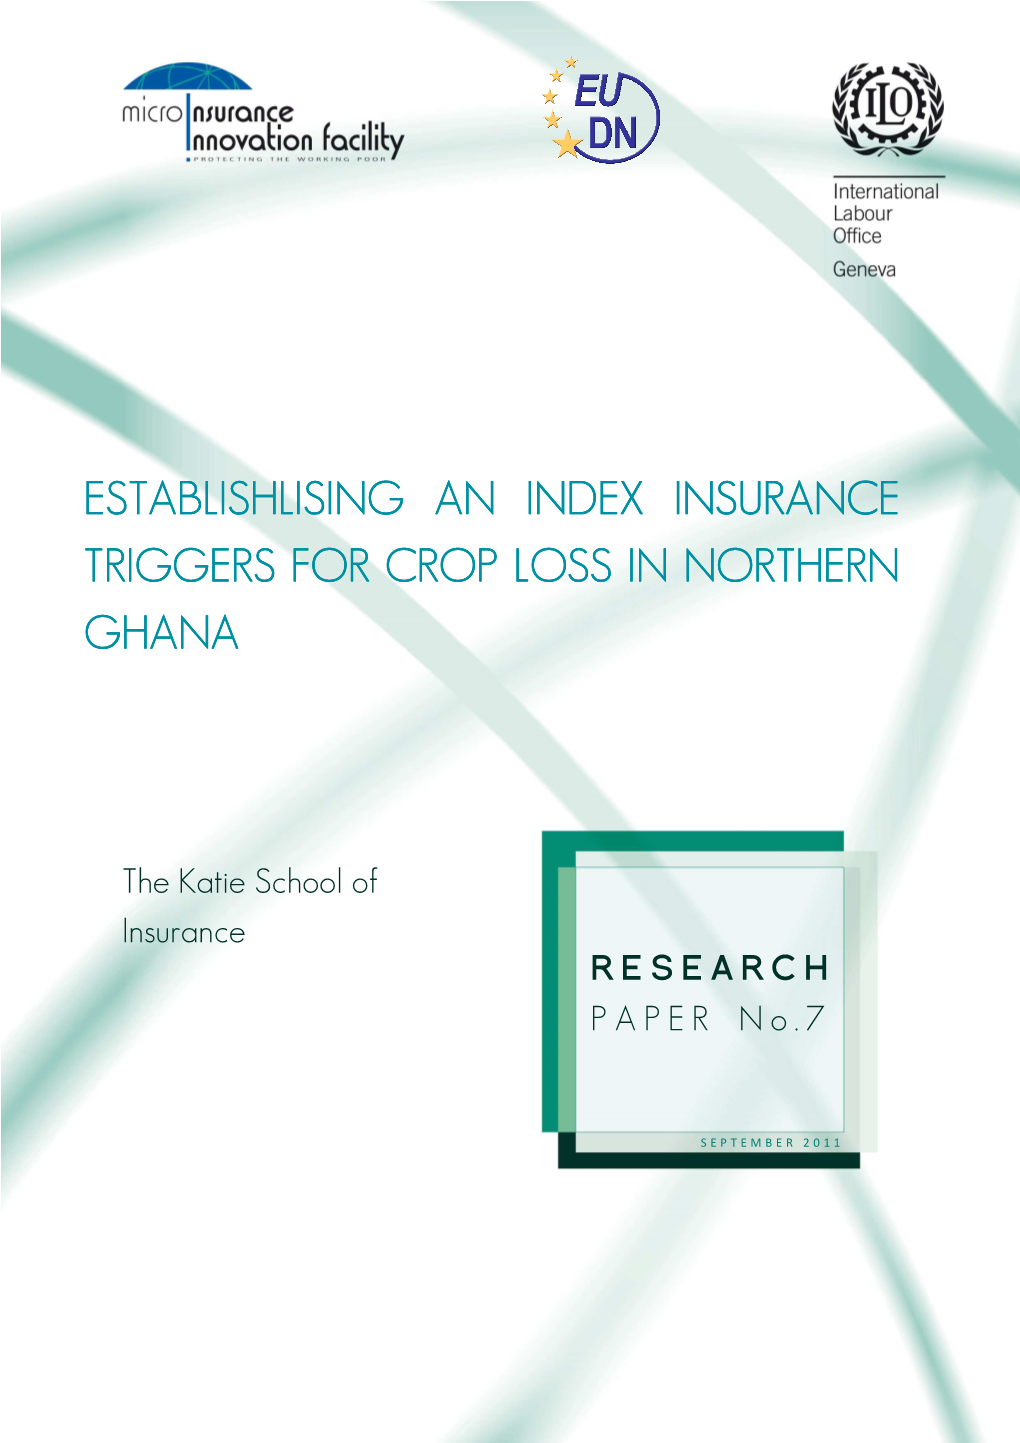 Establishing an Index Insurance Trigger for Crop Loss in Northern Ghana